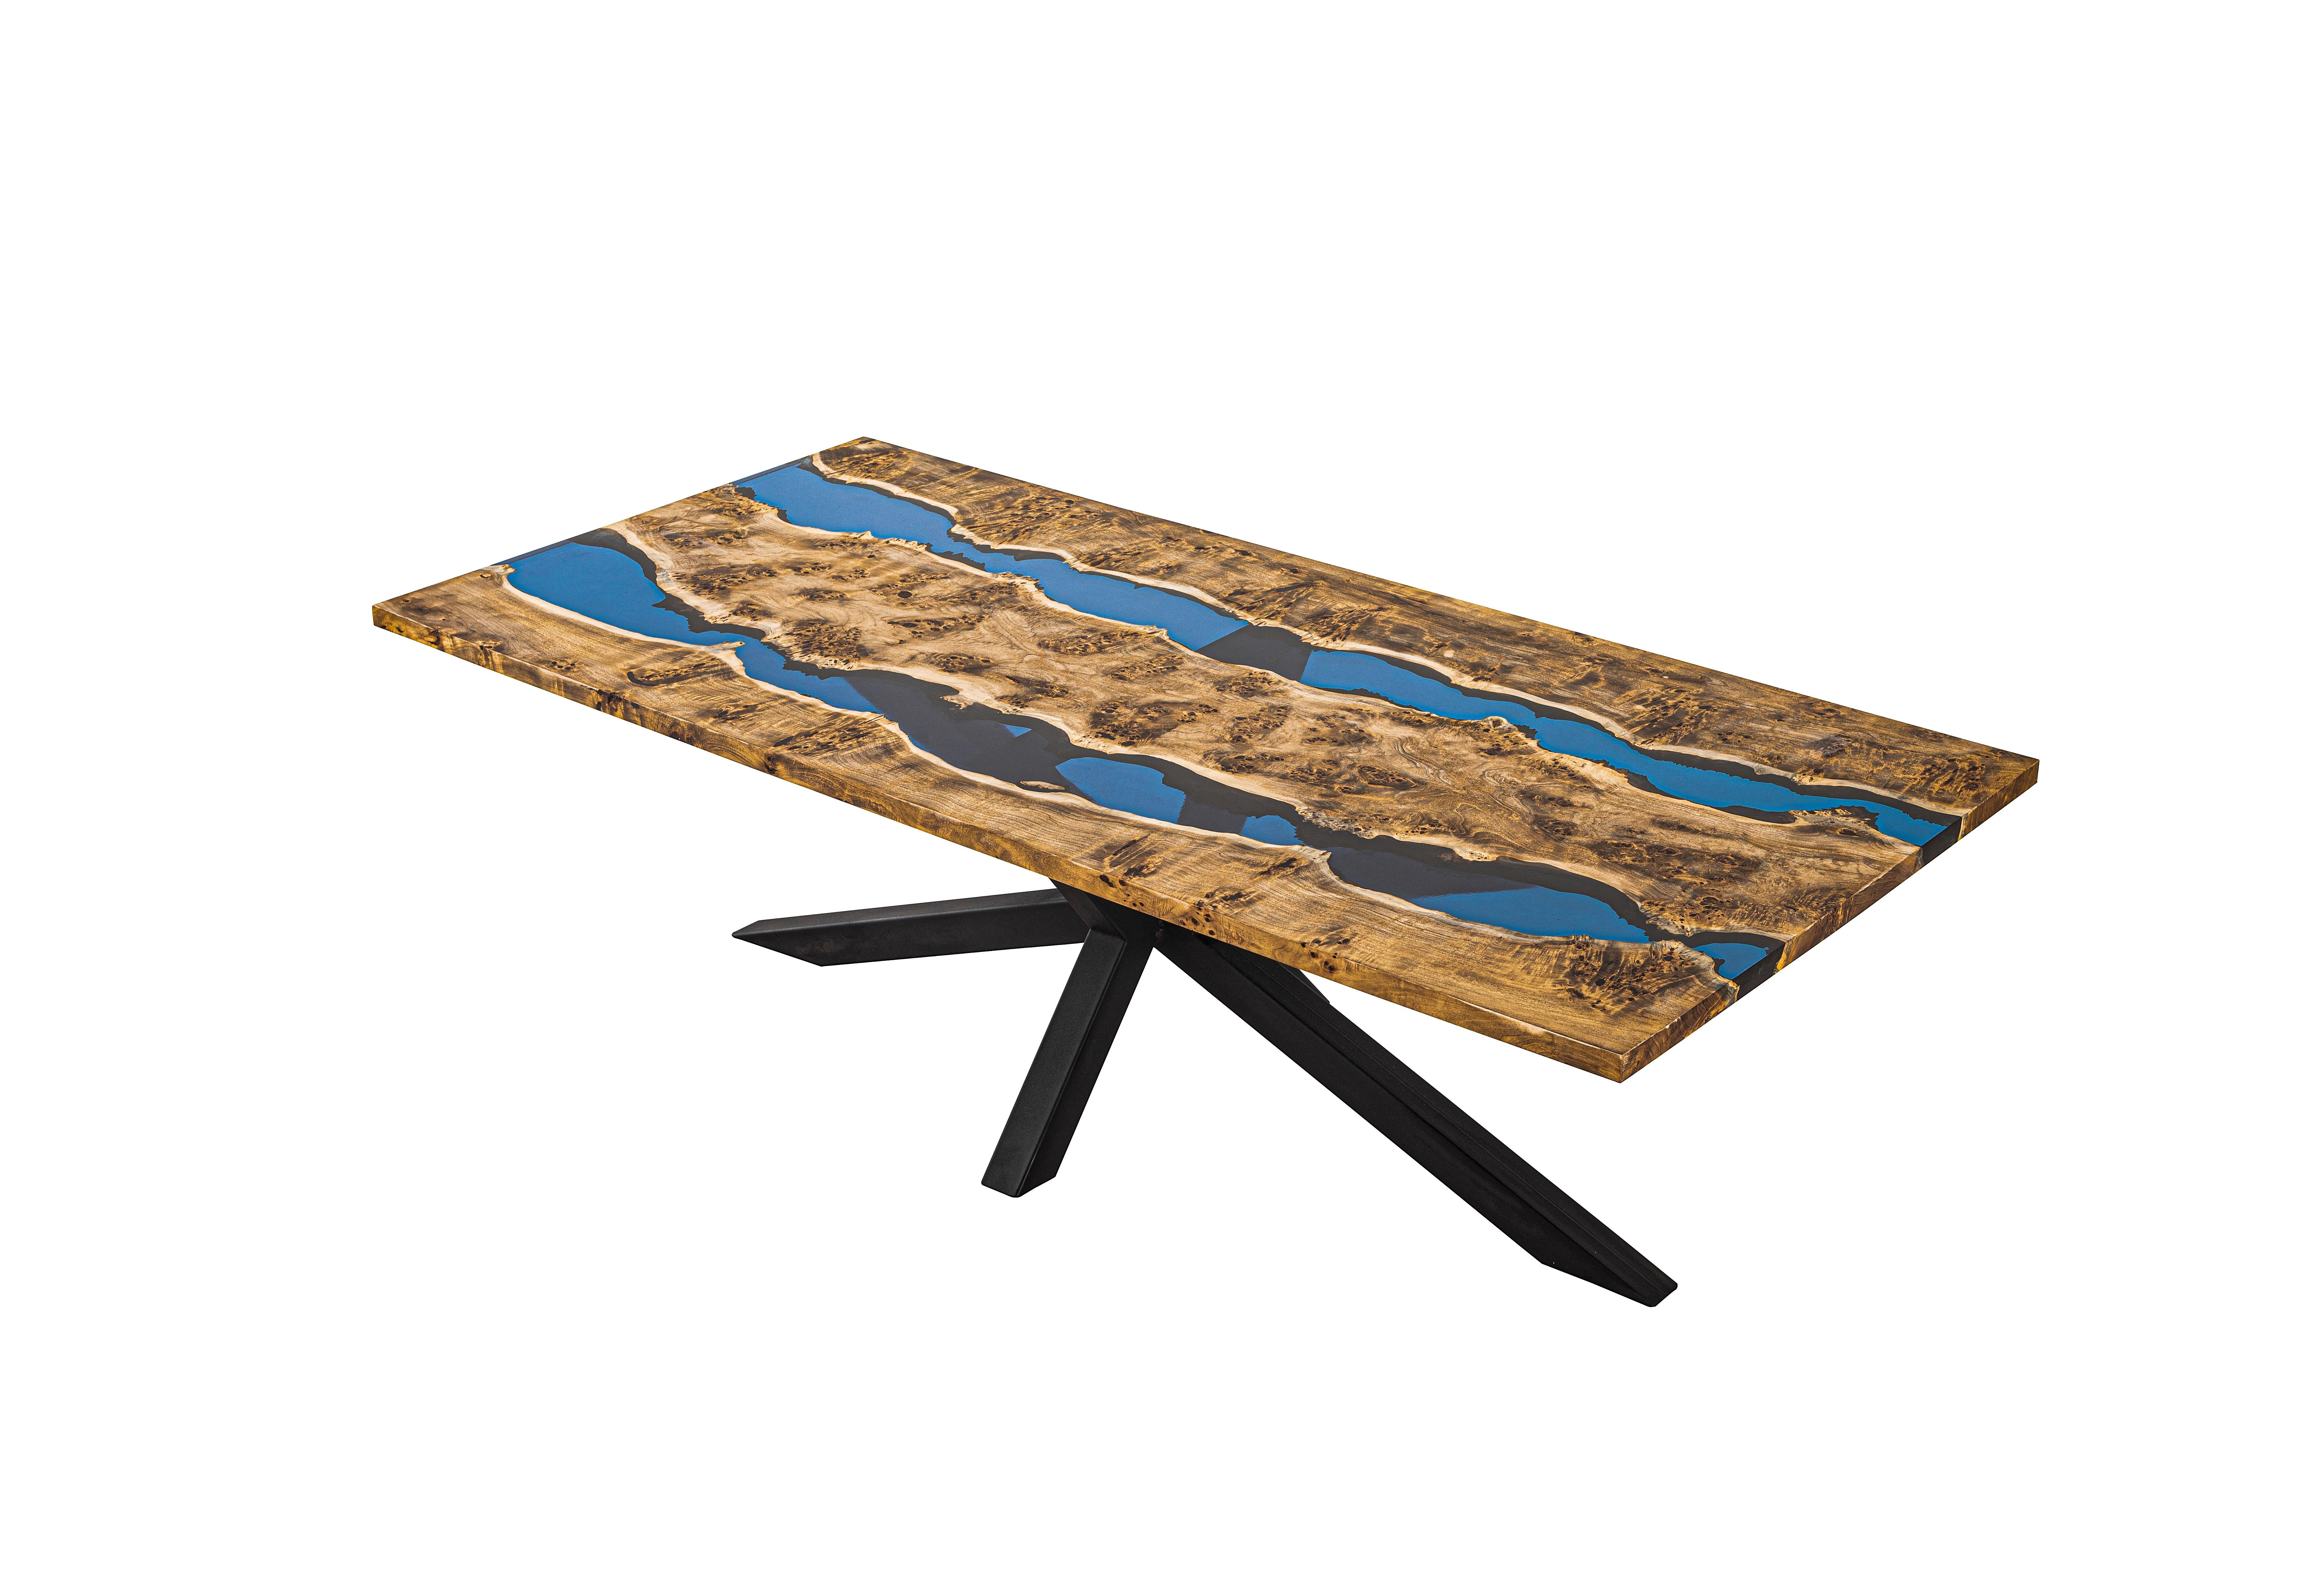 Mappa Burl Epoxy Dining Table

This table is made of an unbelievable piece of mappa burl slabs! It is a combination of sea blue epoxy color and natural mappa burl wood. 

Custom sizes, colours and finishes are available!